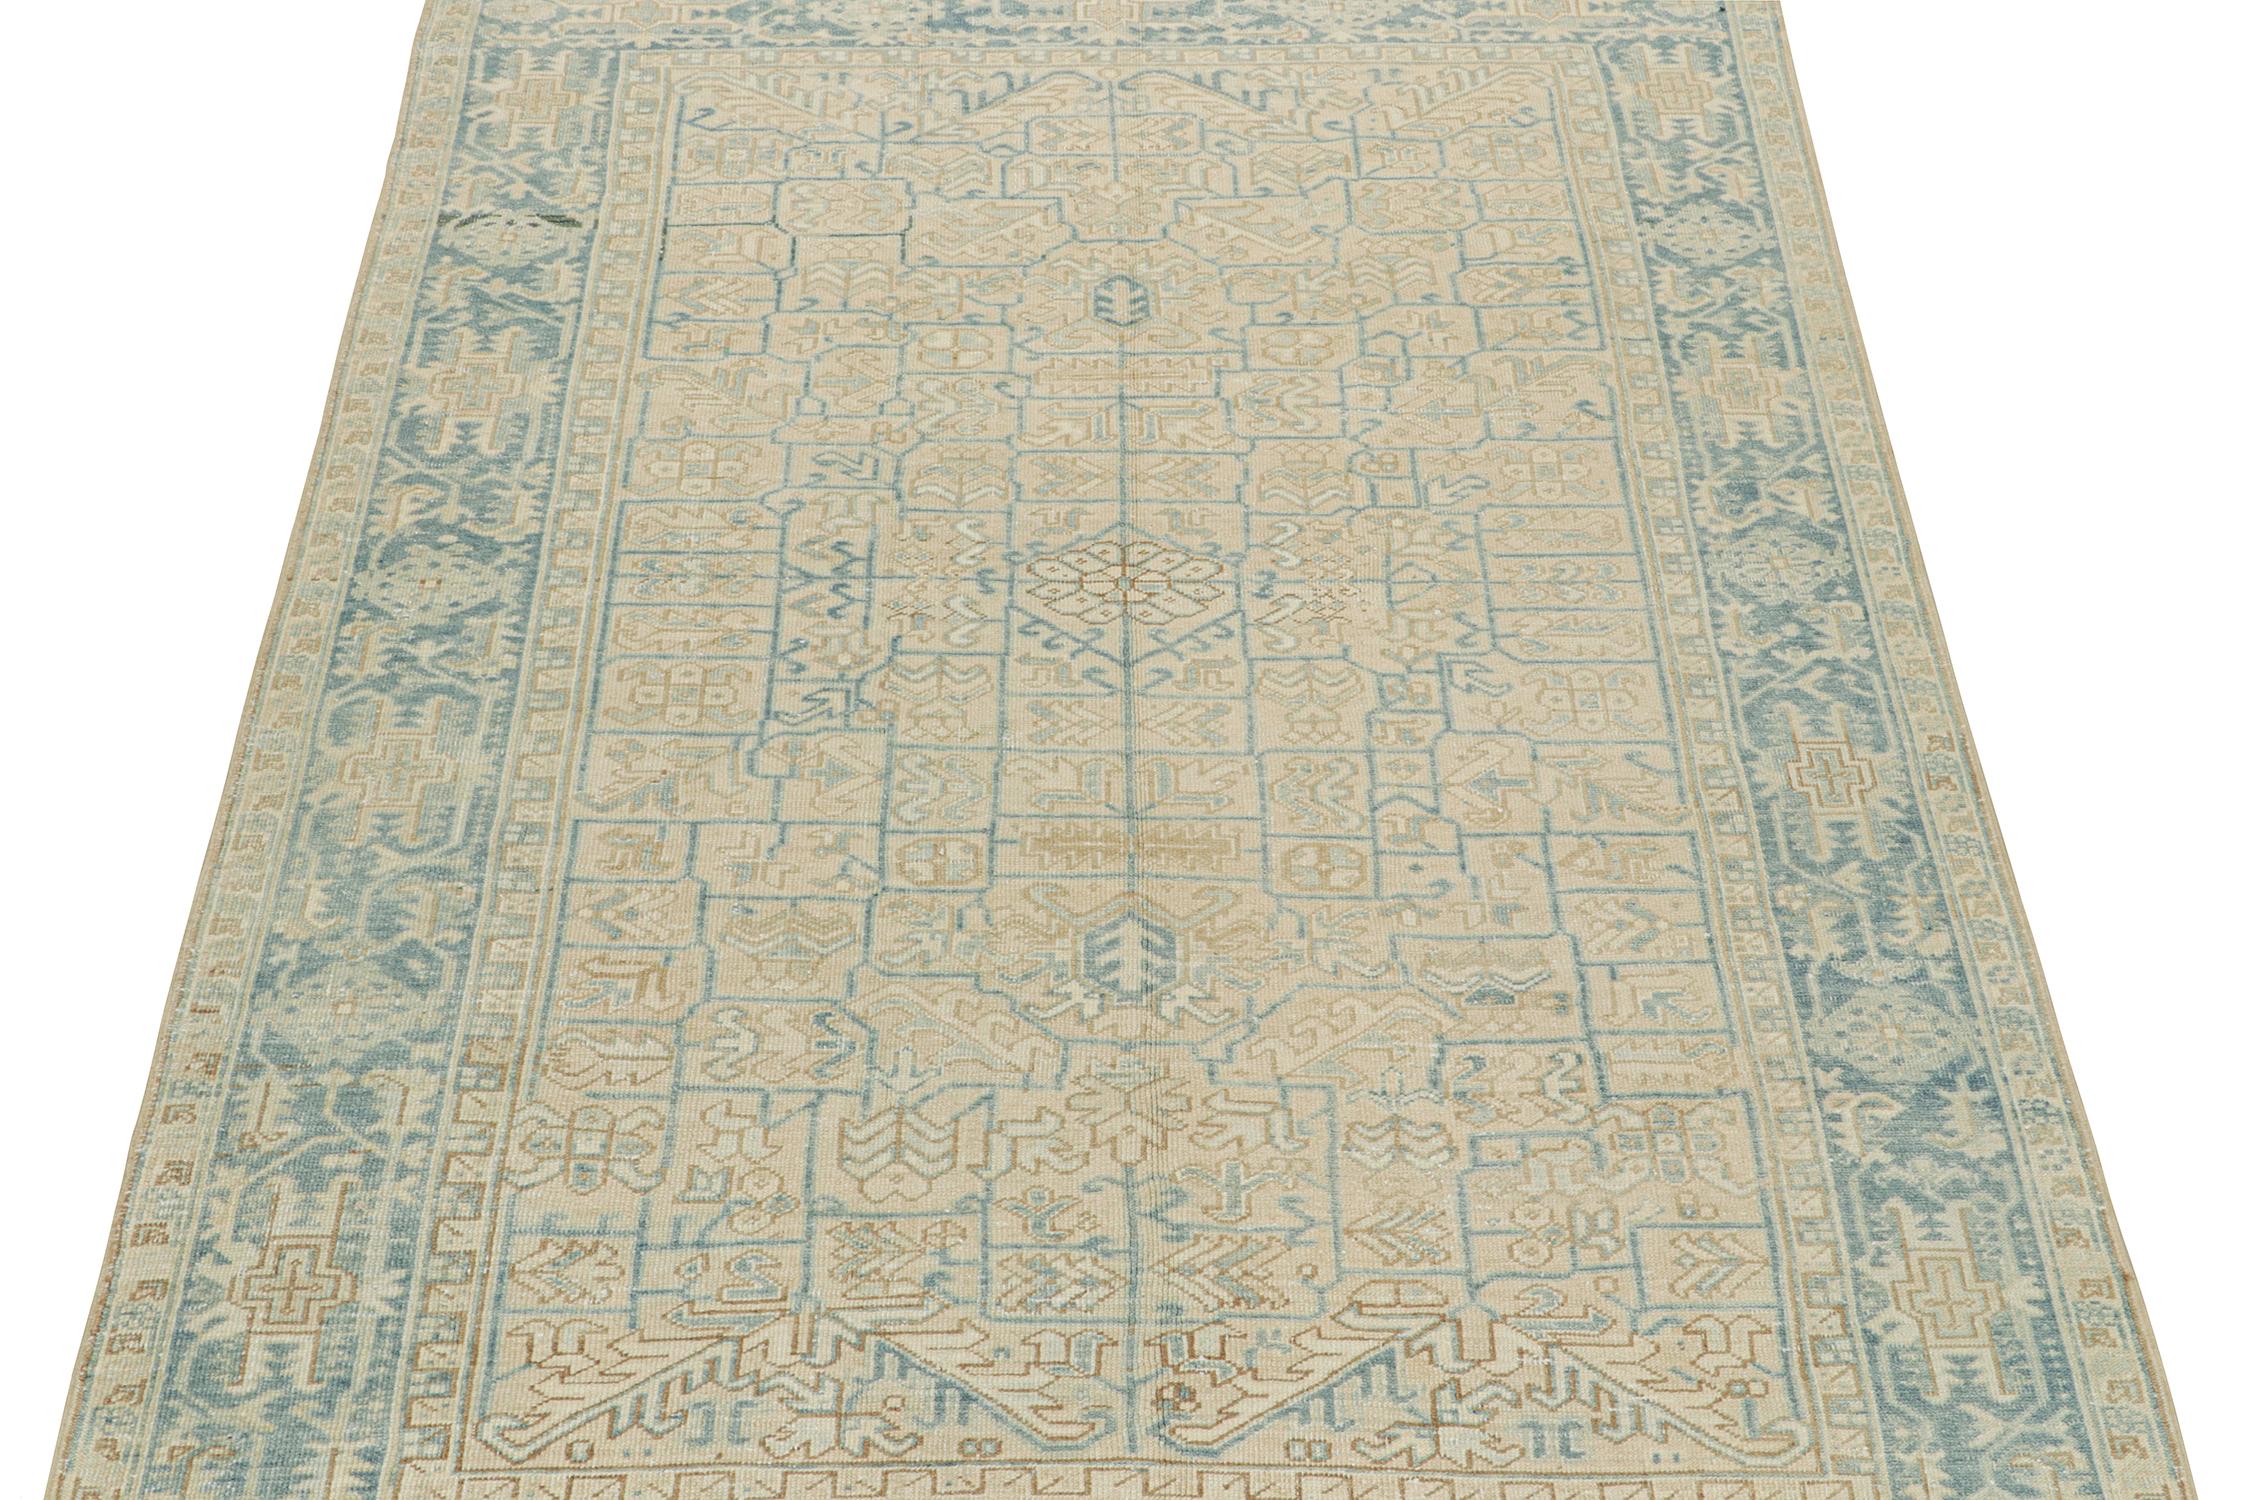 This vintage 8x10 rug is believed to be a Northwest Persian rug—hand knotted in wool circa 1950-1960.

On the Design:

This design is unique in its subtlety, favoring gentle colors like beige and ice blue one seldom sees in the elaborate